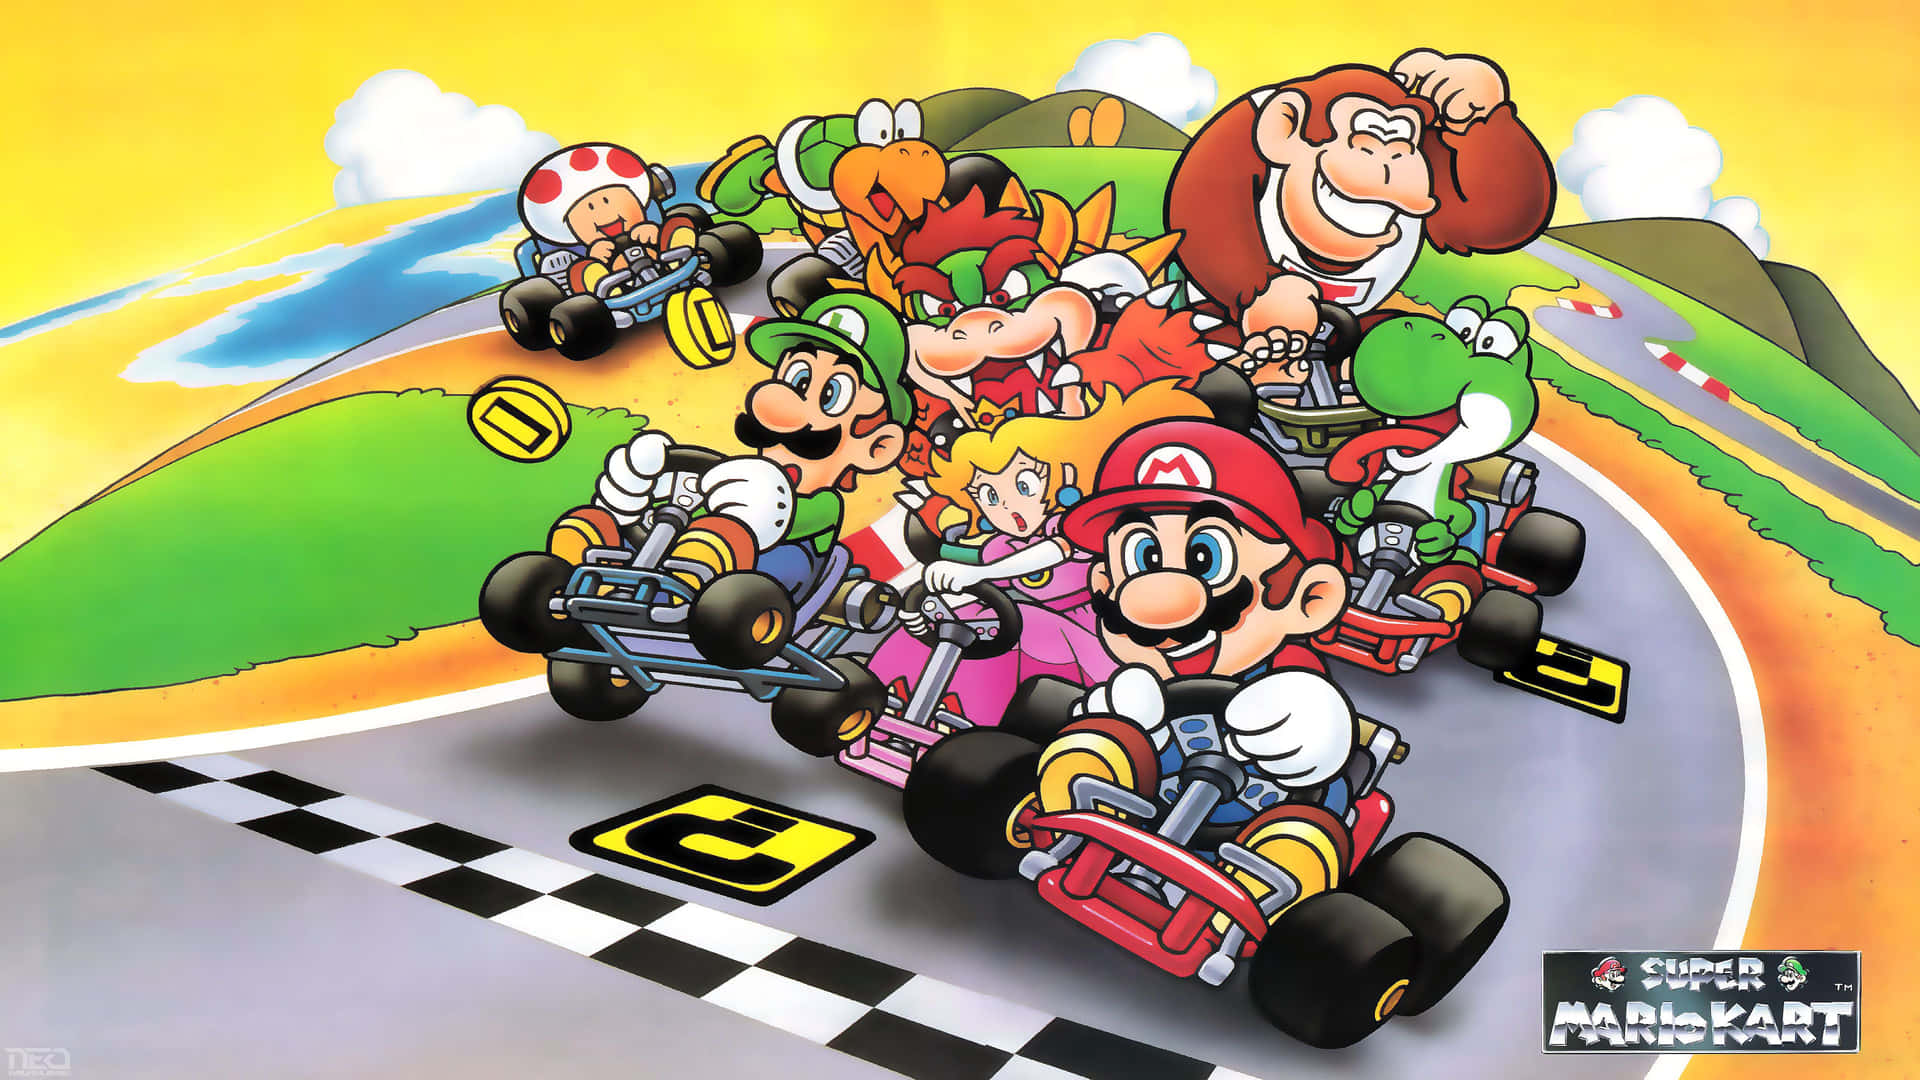 “Drive your way to victory in Mario Kart!”